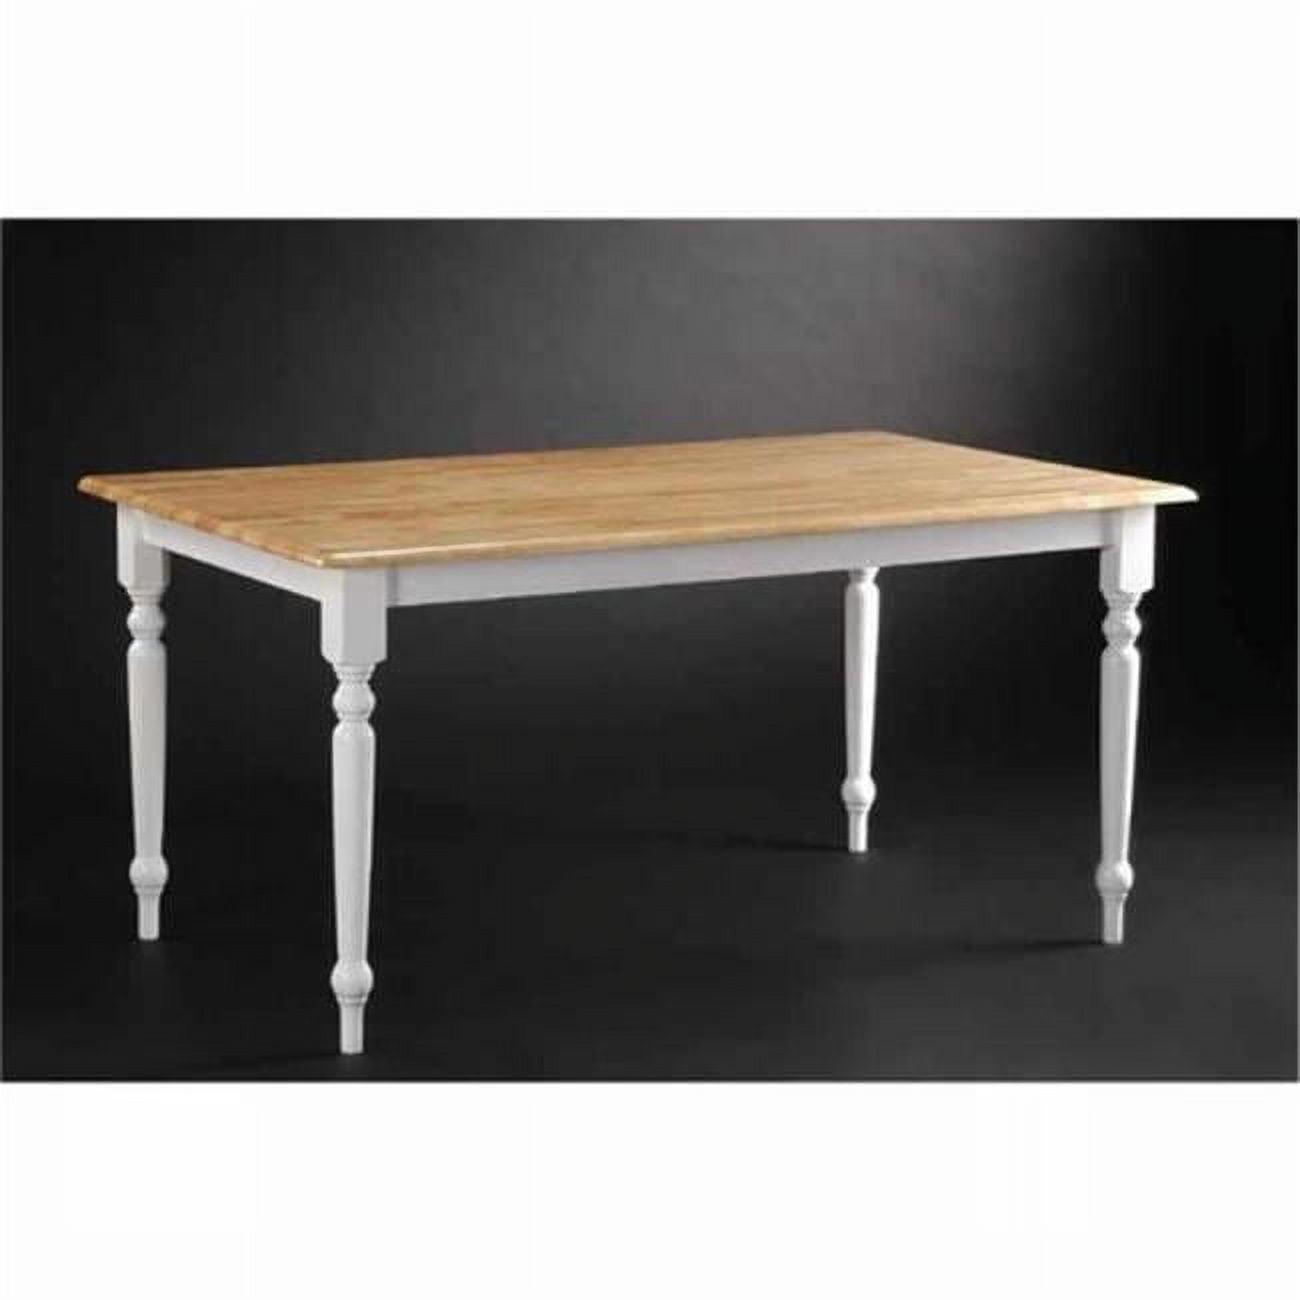 White and Natural Rubberwood Farmhouse Dining Table